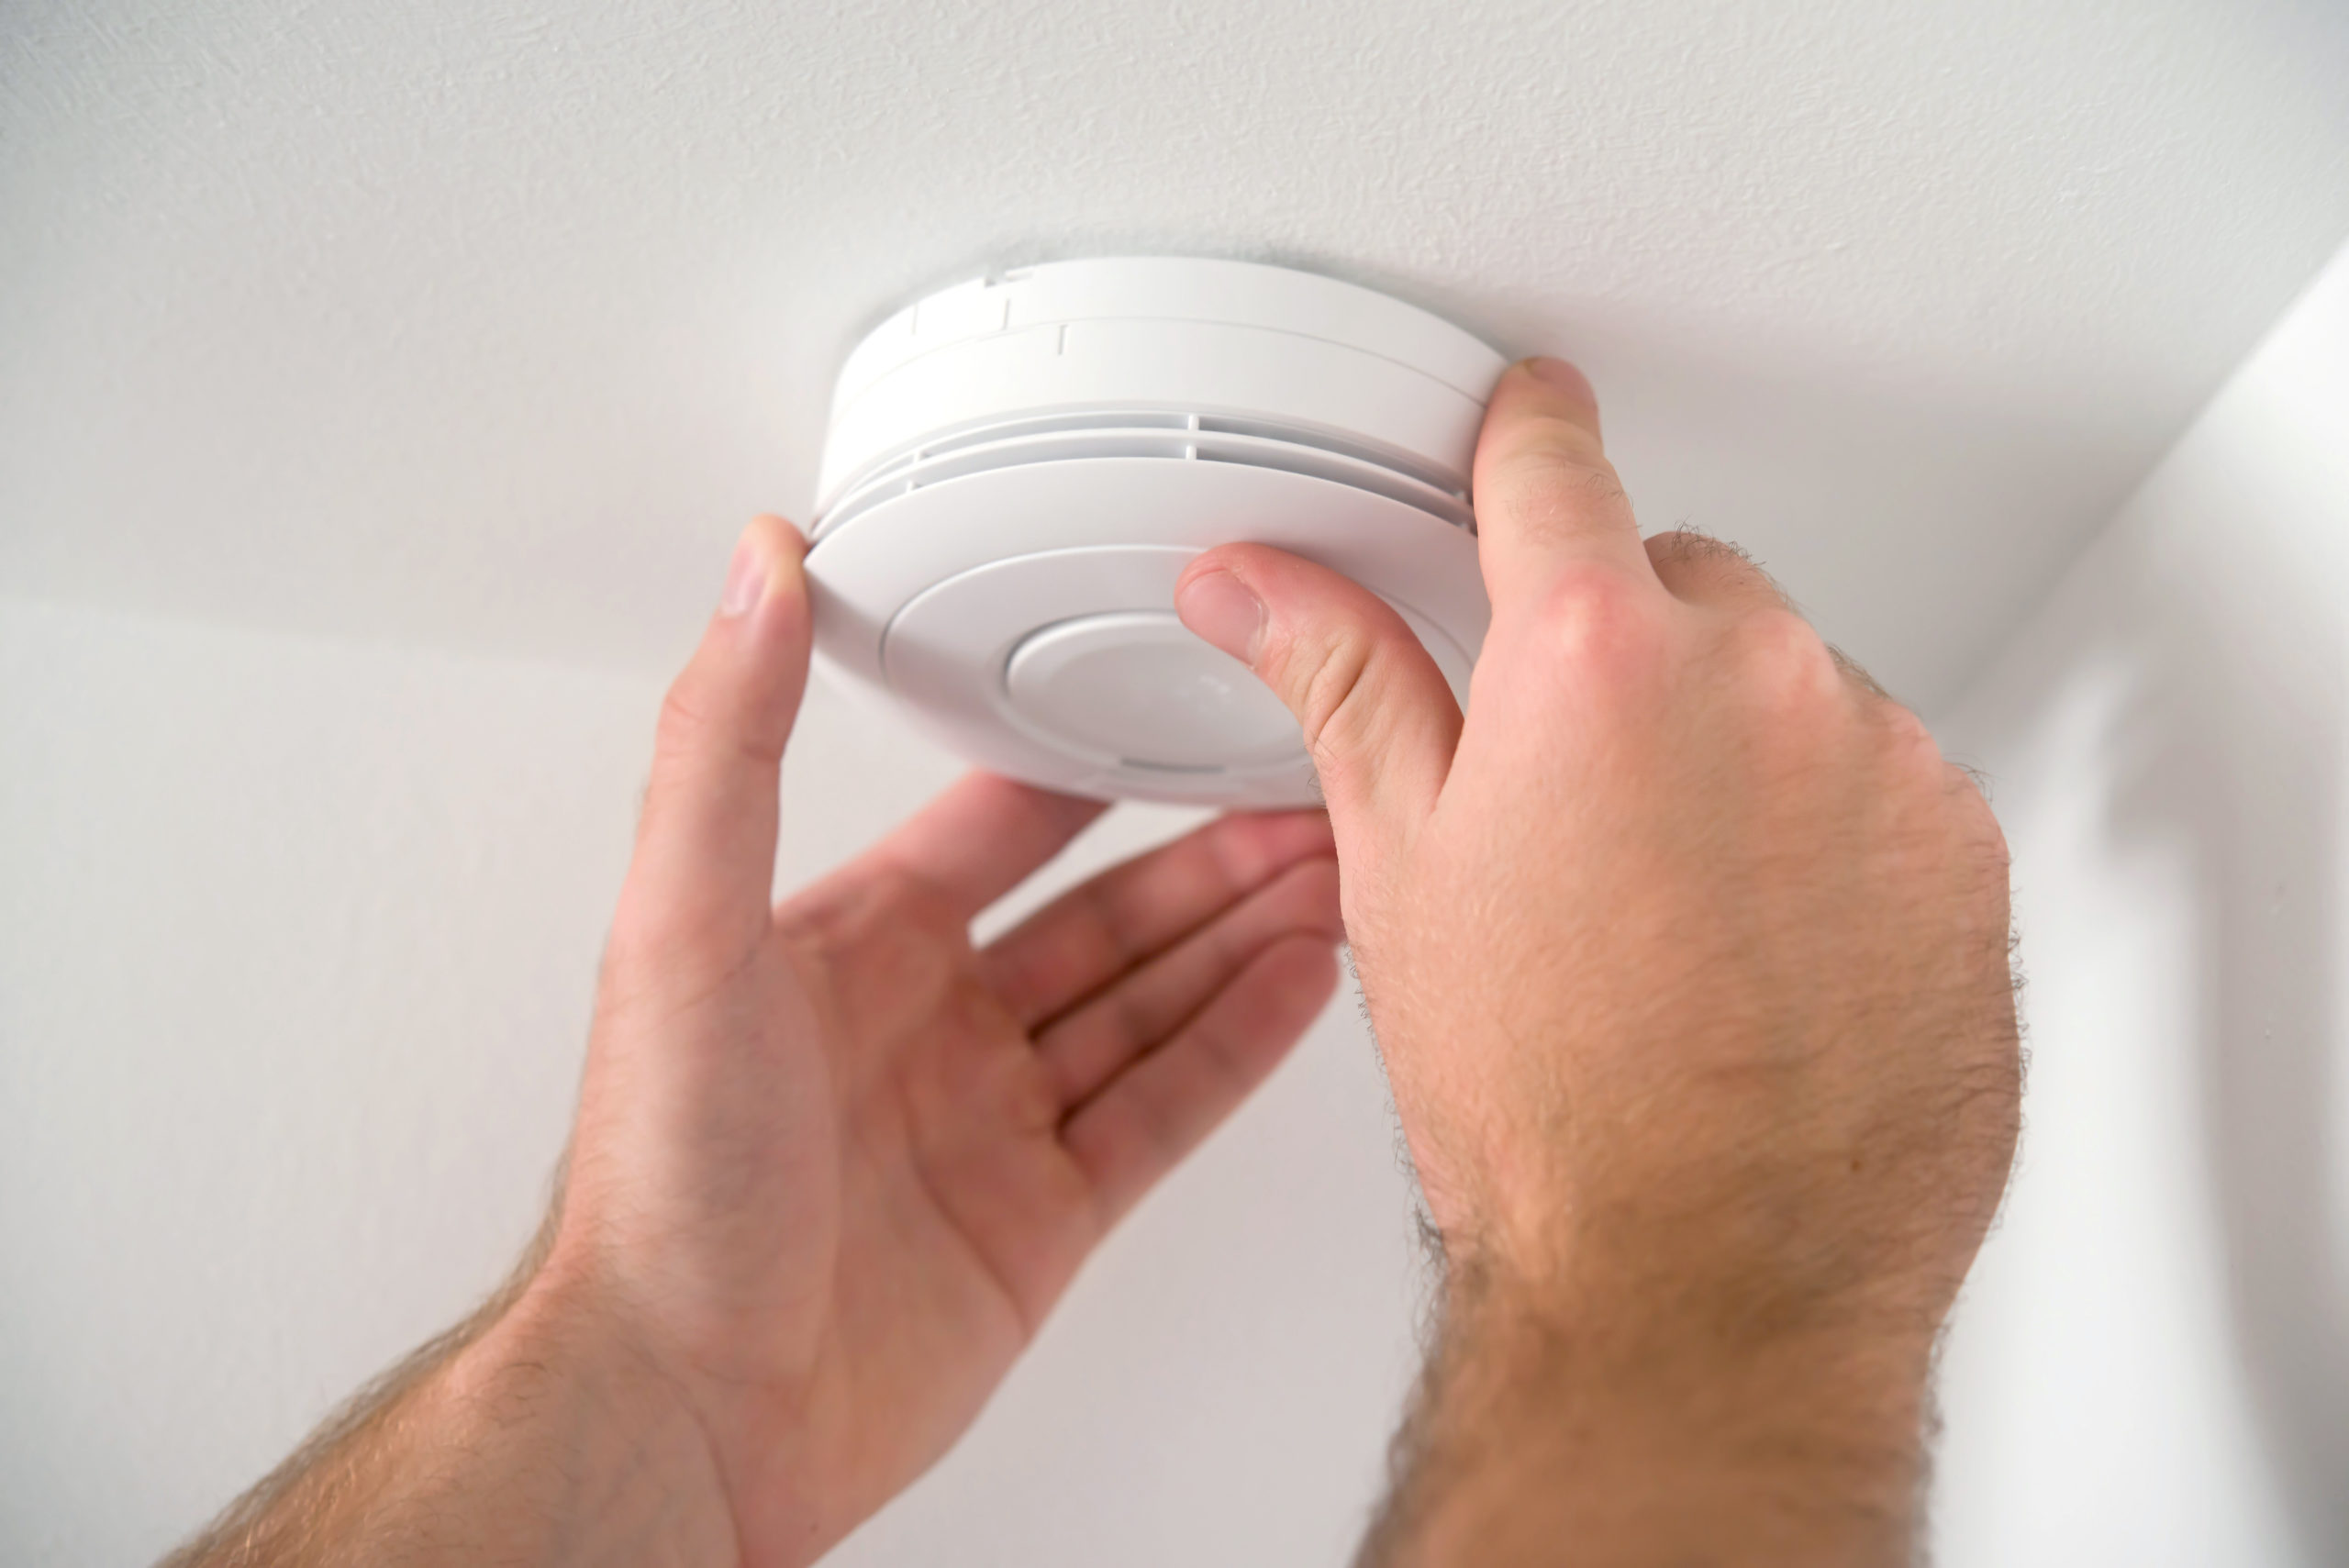 Is your smoke or carbon monoxide alarm chirping? Here's what it's